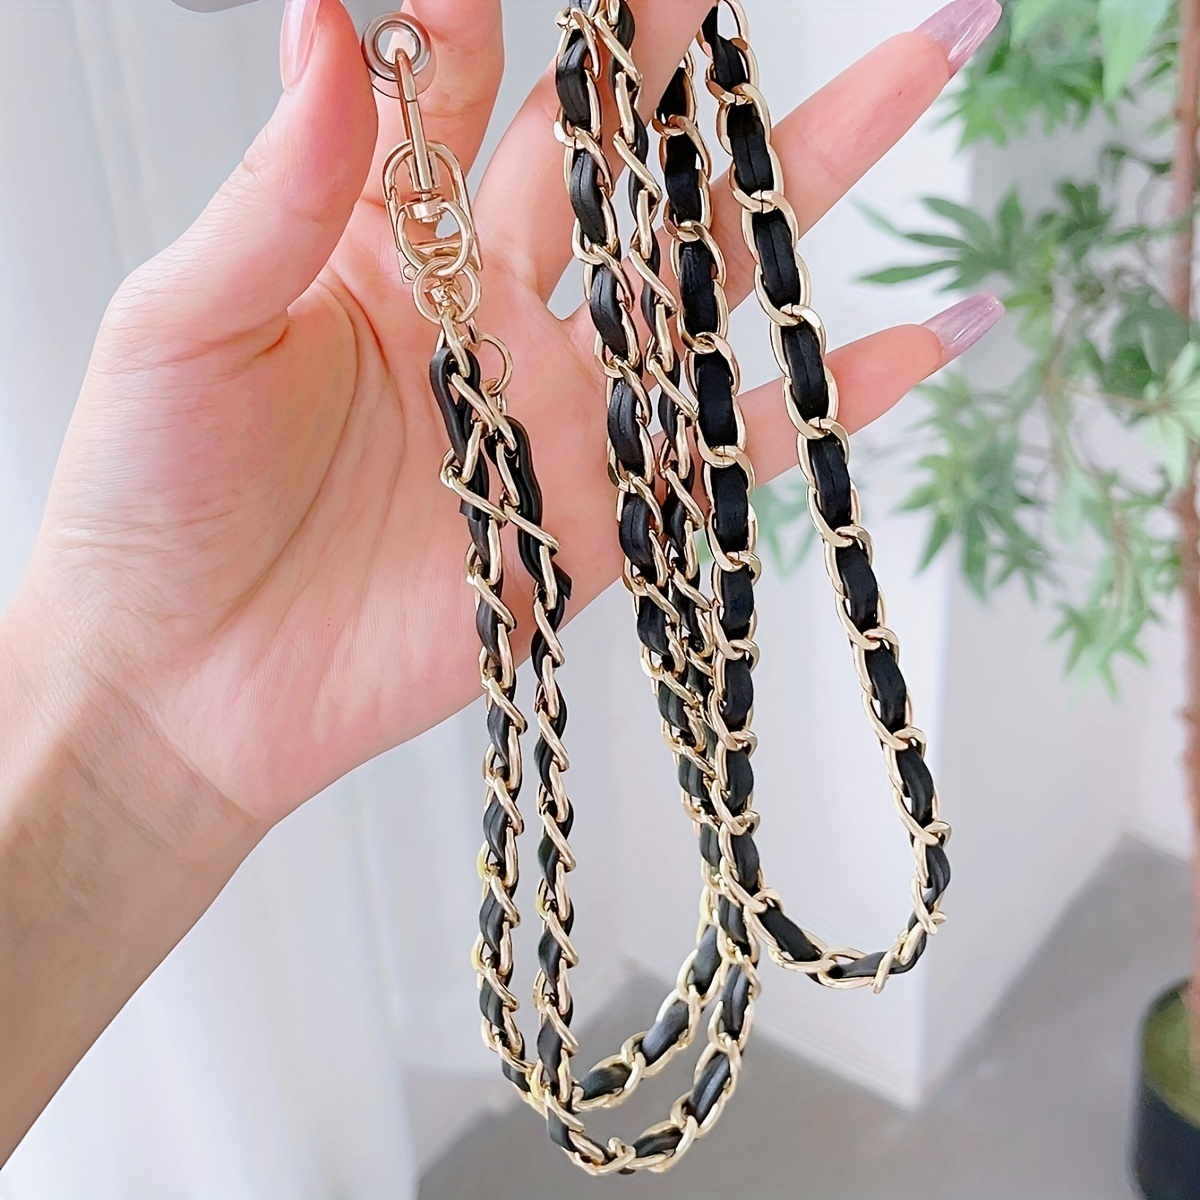 

1pcs Spiral Double Leather Strap Gold-tone Aluminum Alloy Chain, 1.15m Long Universal Phone Case Lanyard Accessory